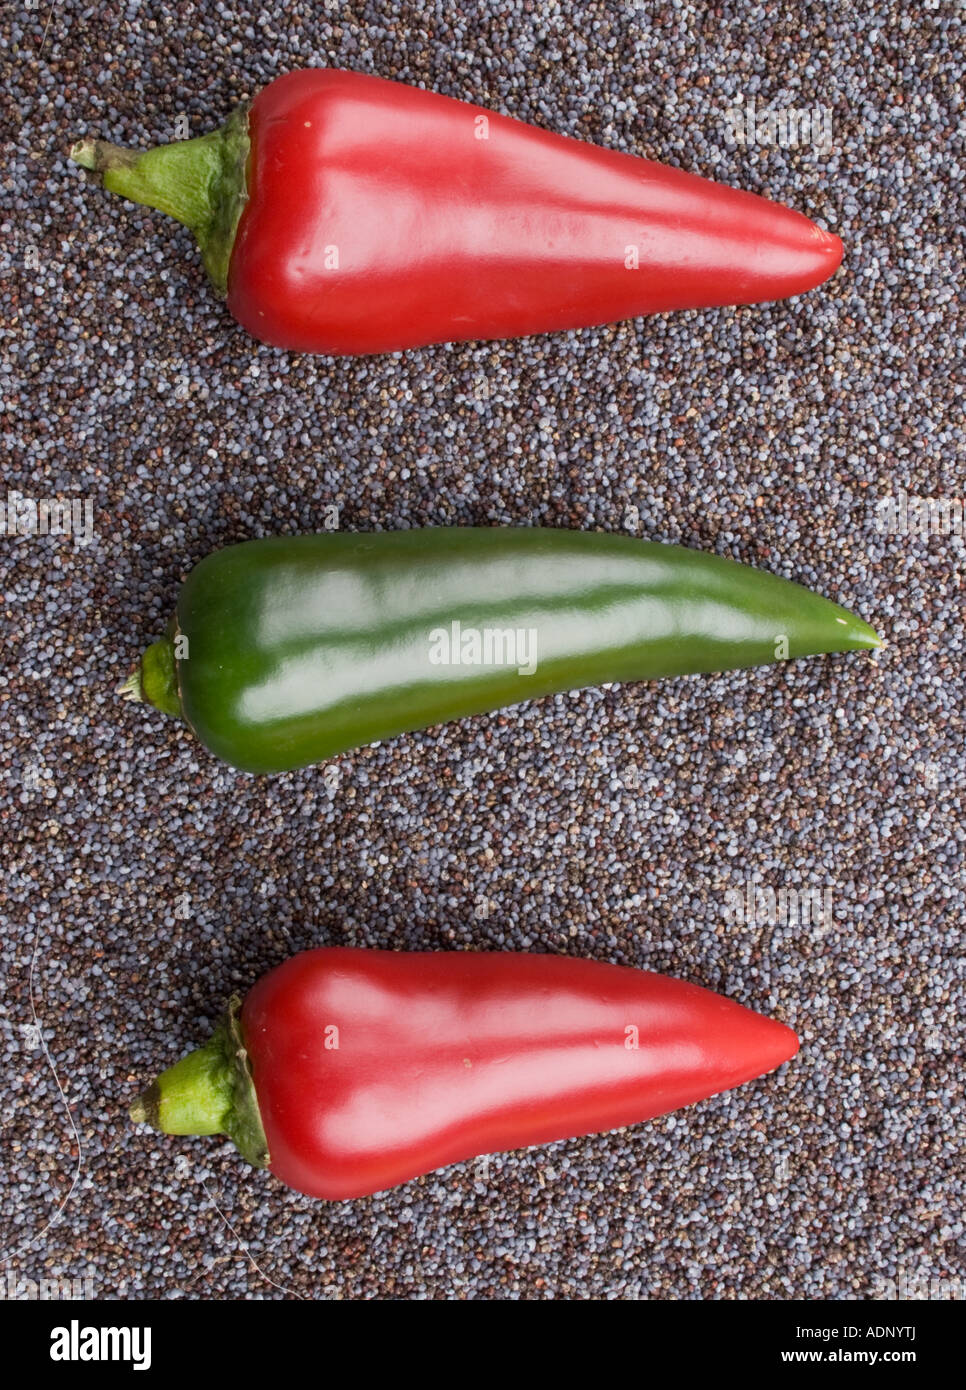 Three Chili Peppers, red and green on blue Poppy Seeds Pointing Right. Stock Photo